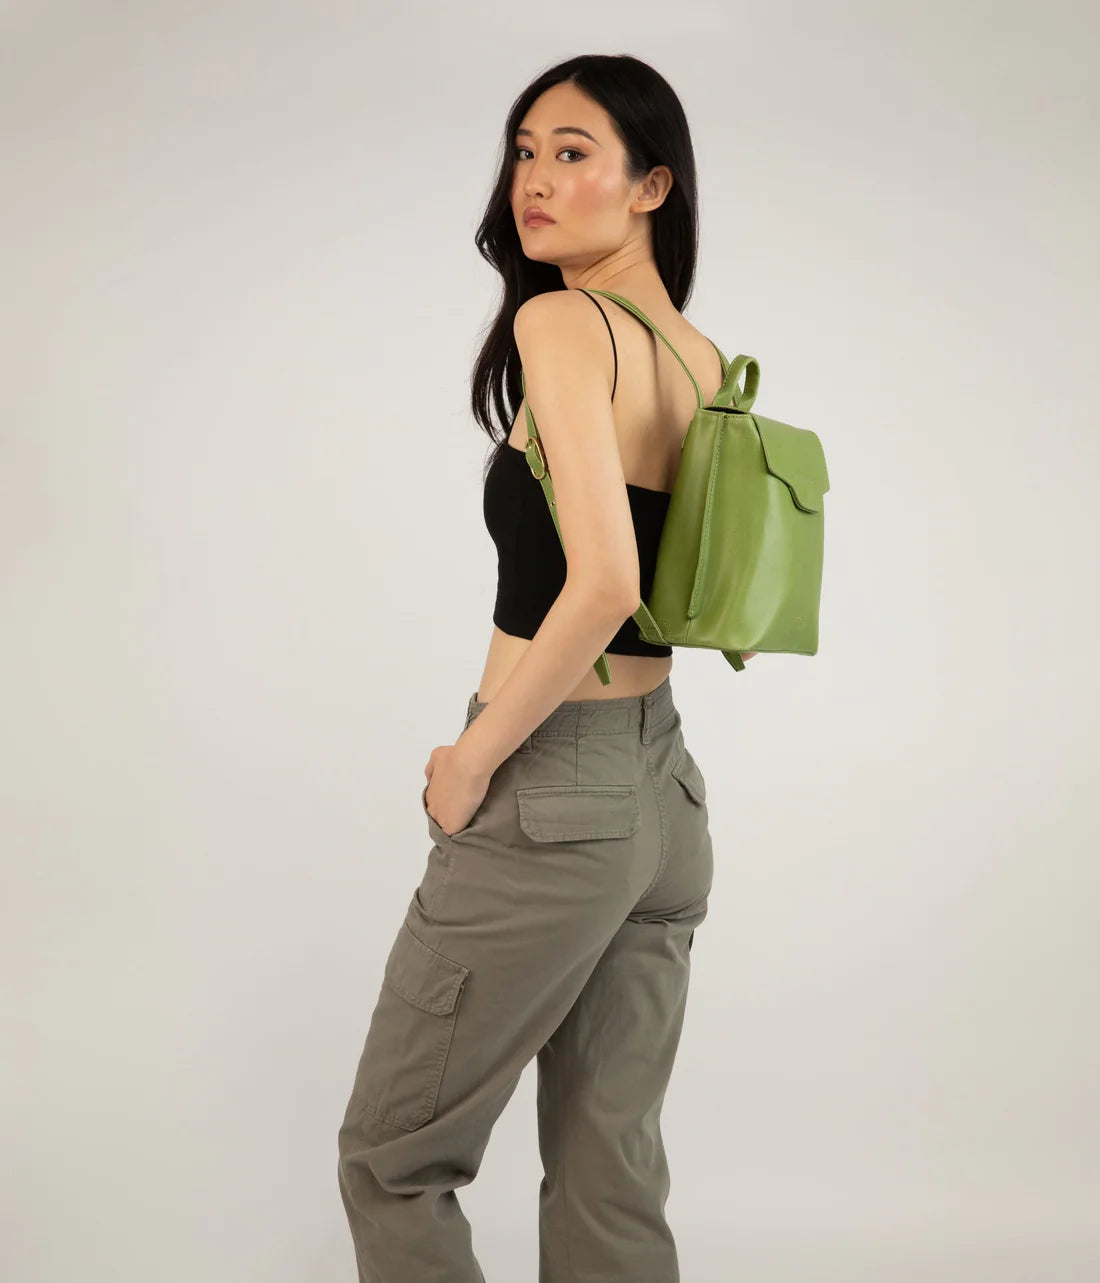 Chelle Small Vegan Backpack - Vintage Smoothie by Matt & Nat